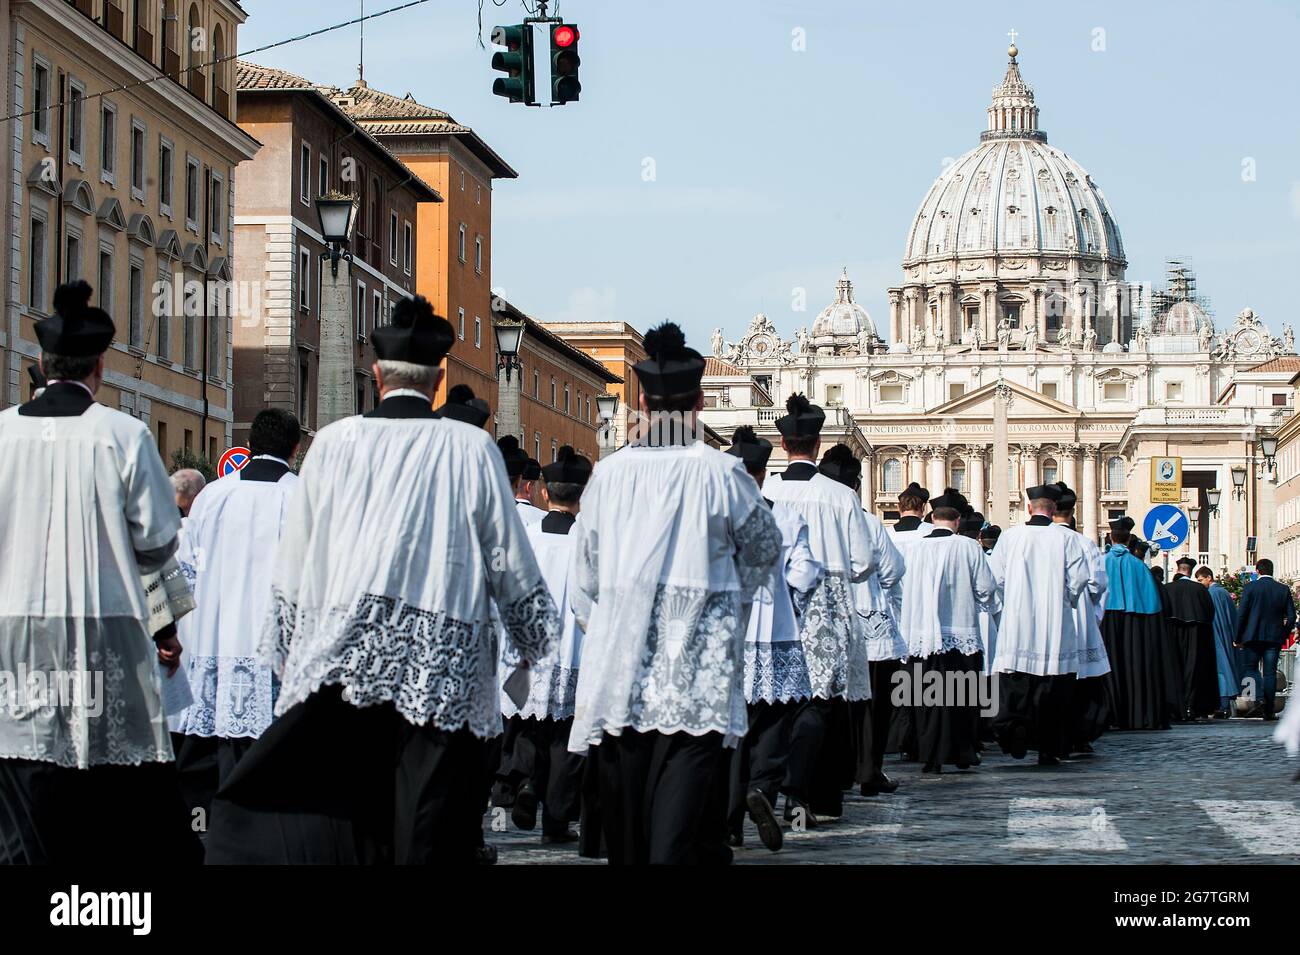 Rome, Italy. 16th Sep, 2017. September 16, 2017 : Solemn procession on the occasion of the pilgrimage for the tenth anniversary of the motu proprio of Papa Benedetto XVI 'Summorum Pontificum' from the Church of Santa Maria in Vallicella to St. Peter's Basilica in Rome. Credit: Independent Photo Agency/Alamy Live News Stock Photo